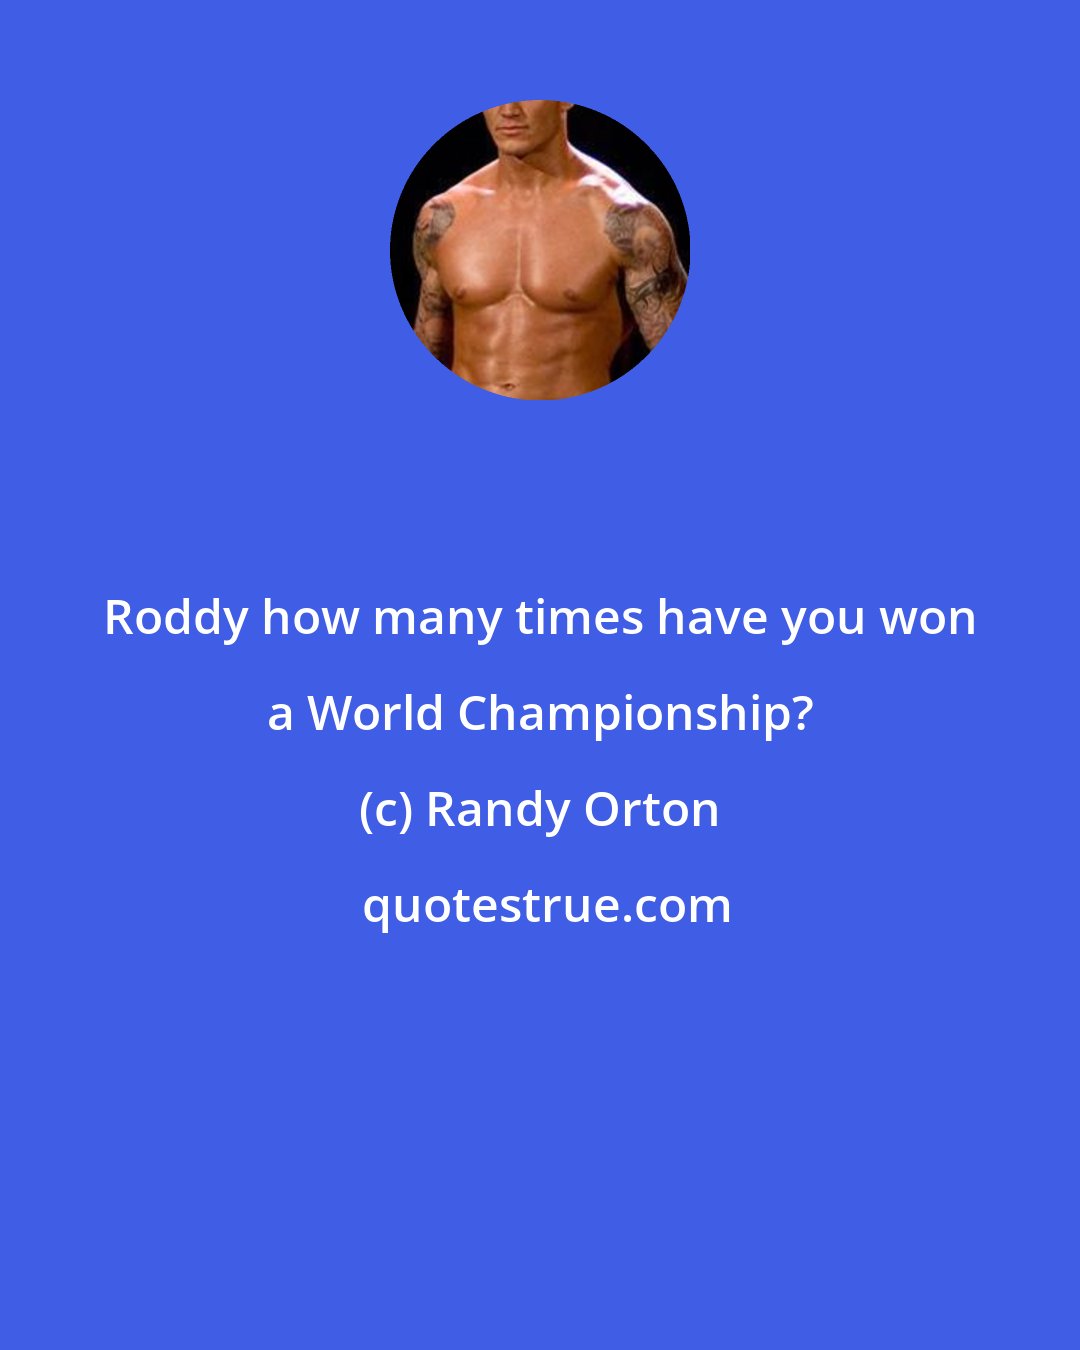 Randy Orton: Roddy how many times have you won a World Championship?